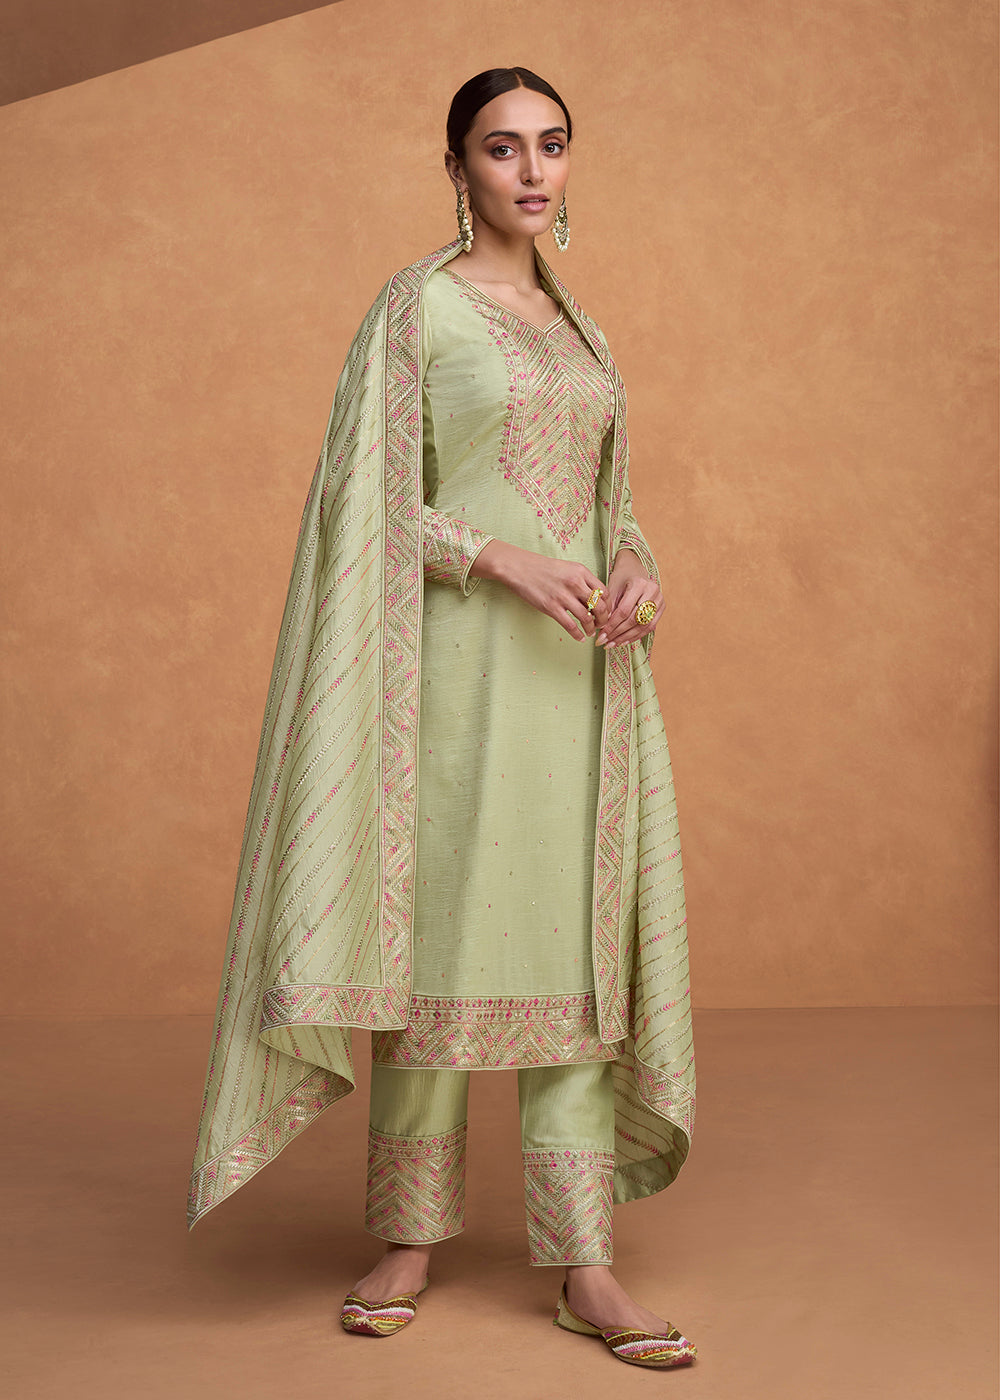 Buy Now Beautiful Light Green Premium Silk Pant Style Salwar Suit Online in USA, UK, Canada, Germany, Australia & Worldwide at Empress Clothing.